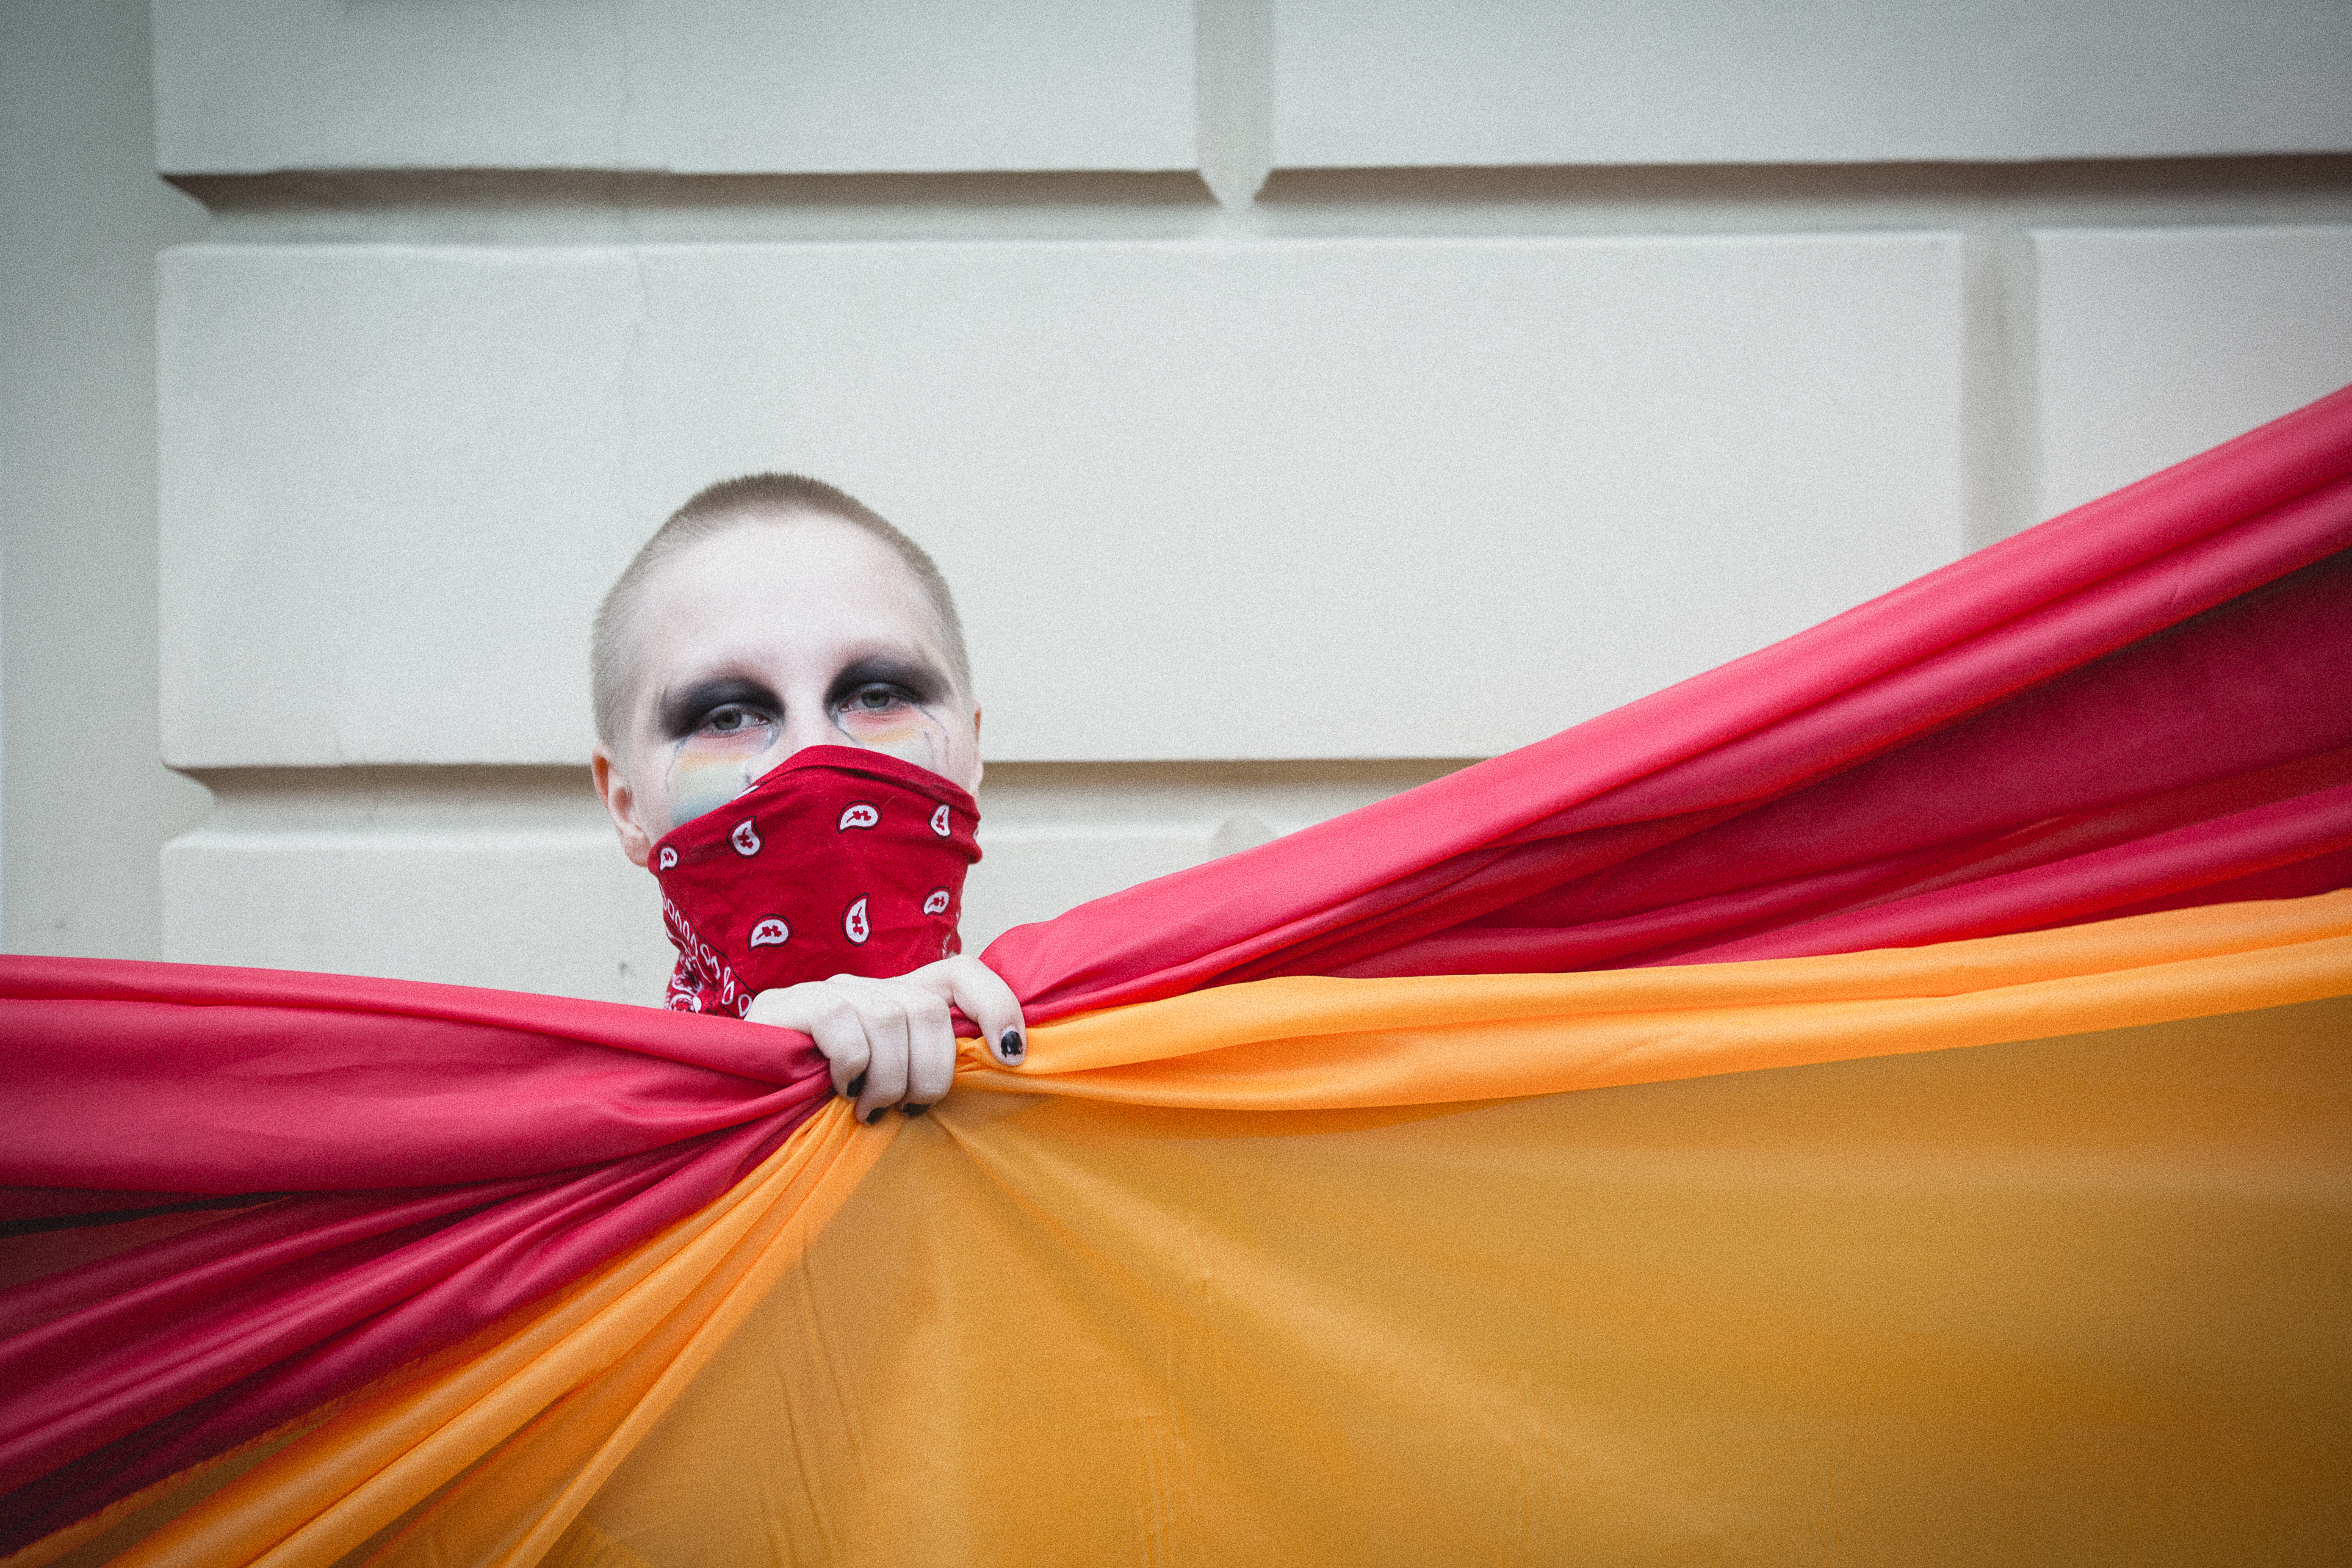 A protestor holding part of a giant pride flag, Warsaw, Poland. October 2020.